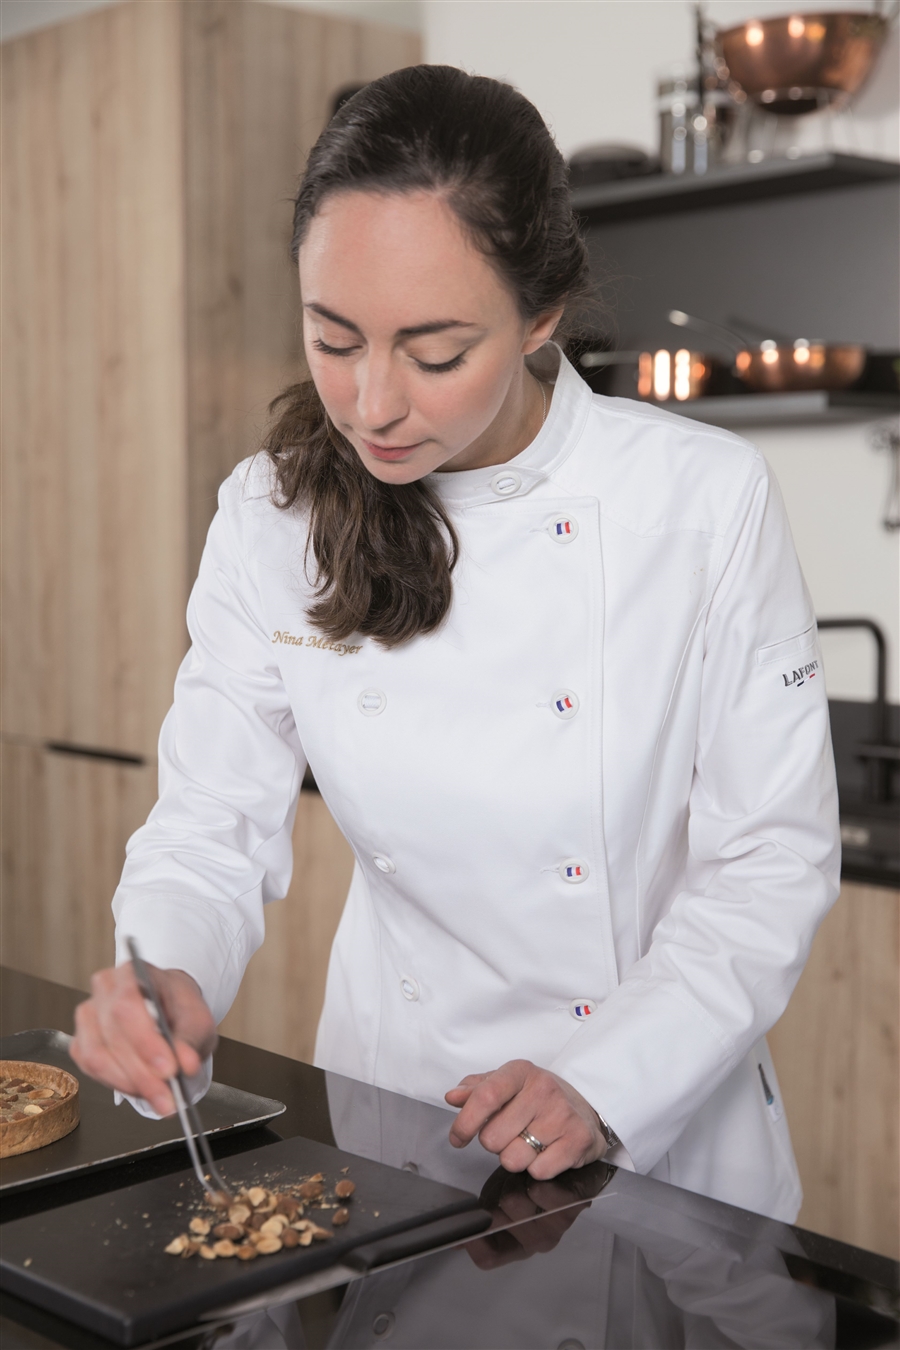 Canope  women fitted Chef jacket white 30% organic cotton - 70% recycled polyester, a comfort eco friendly garment